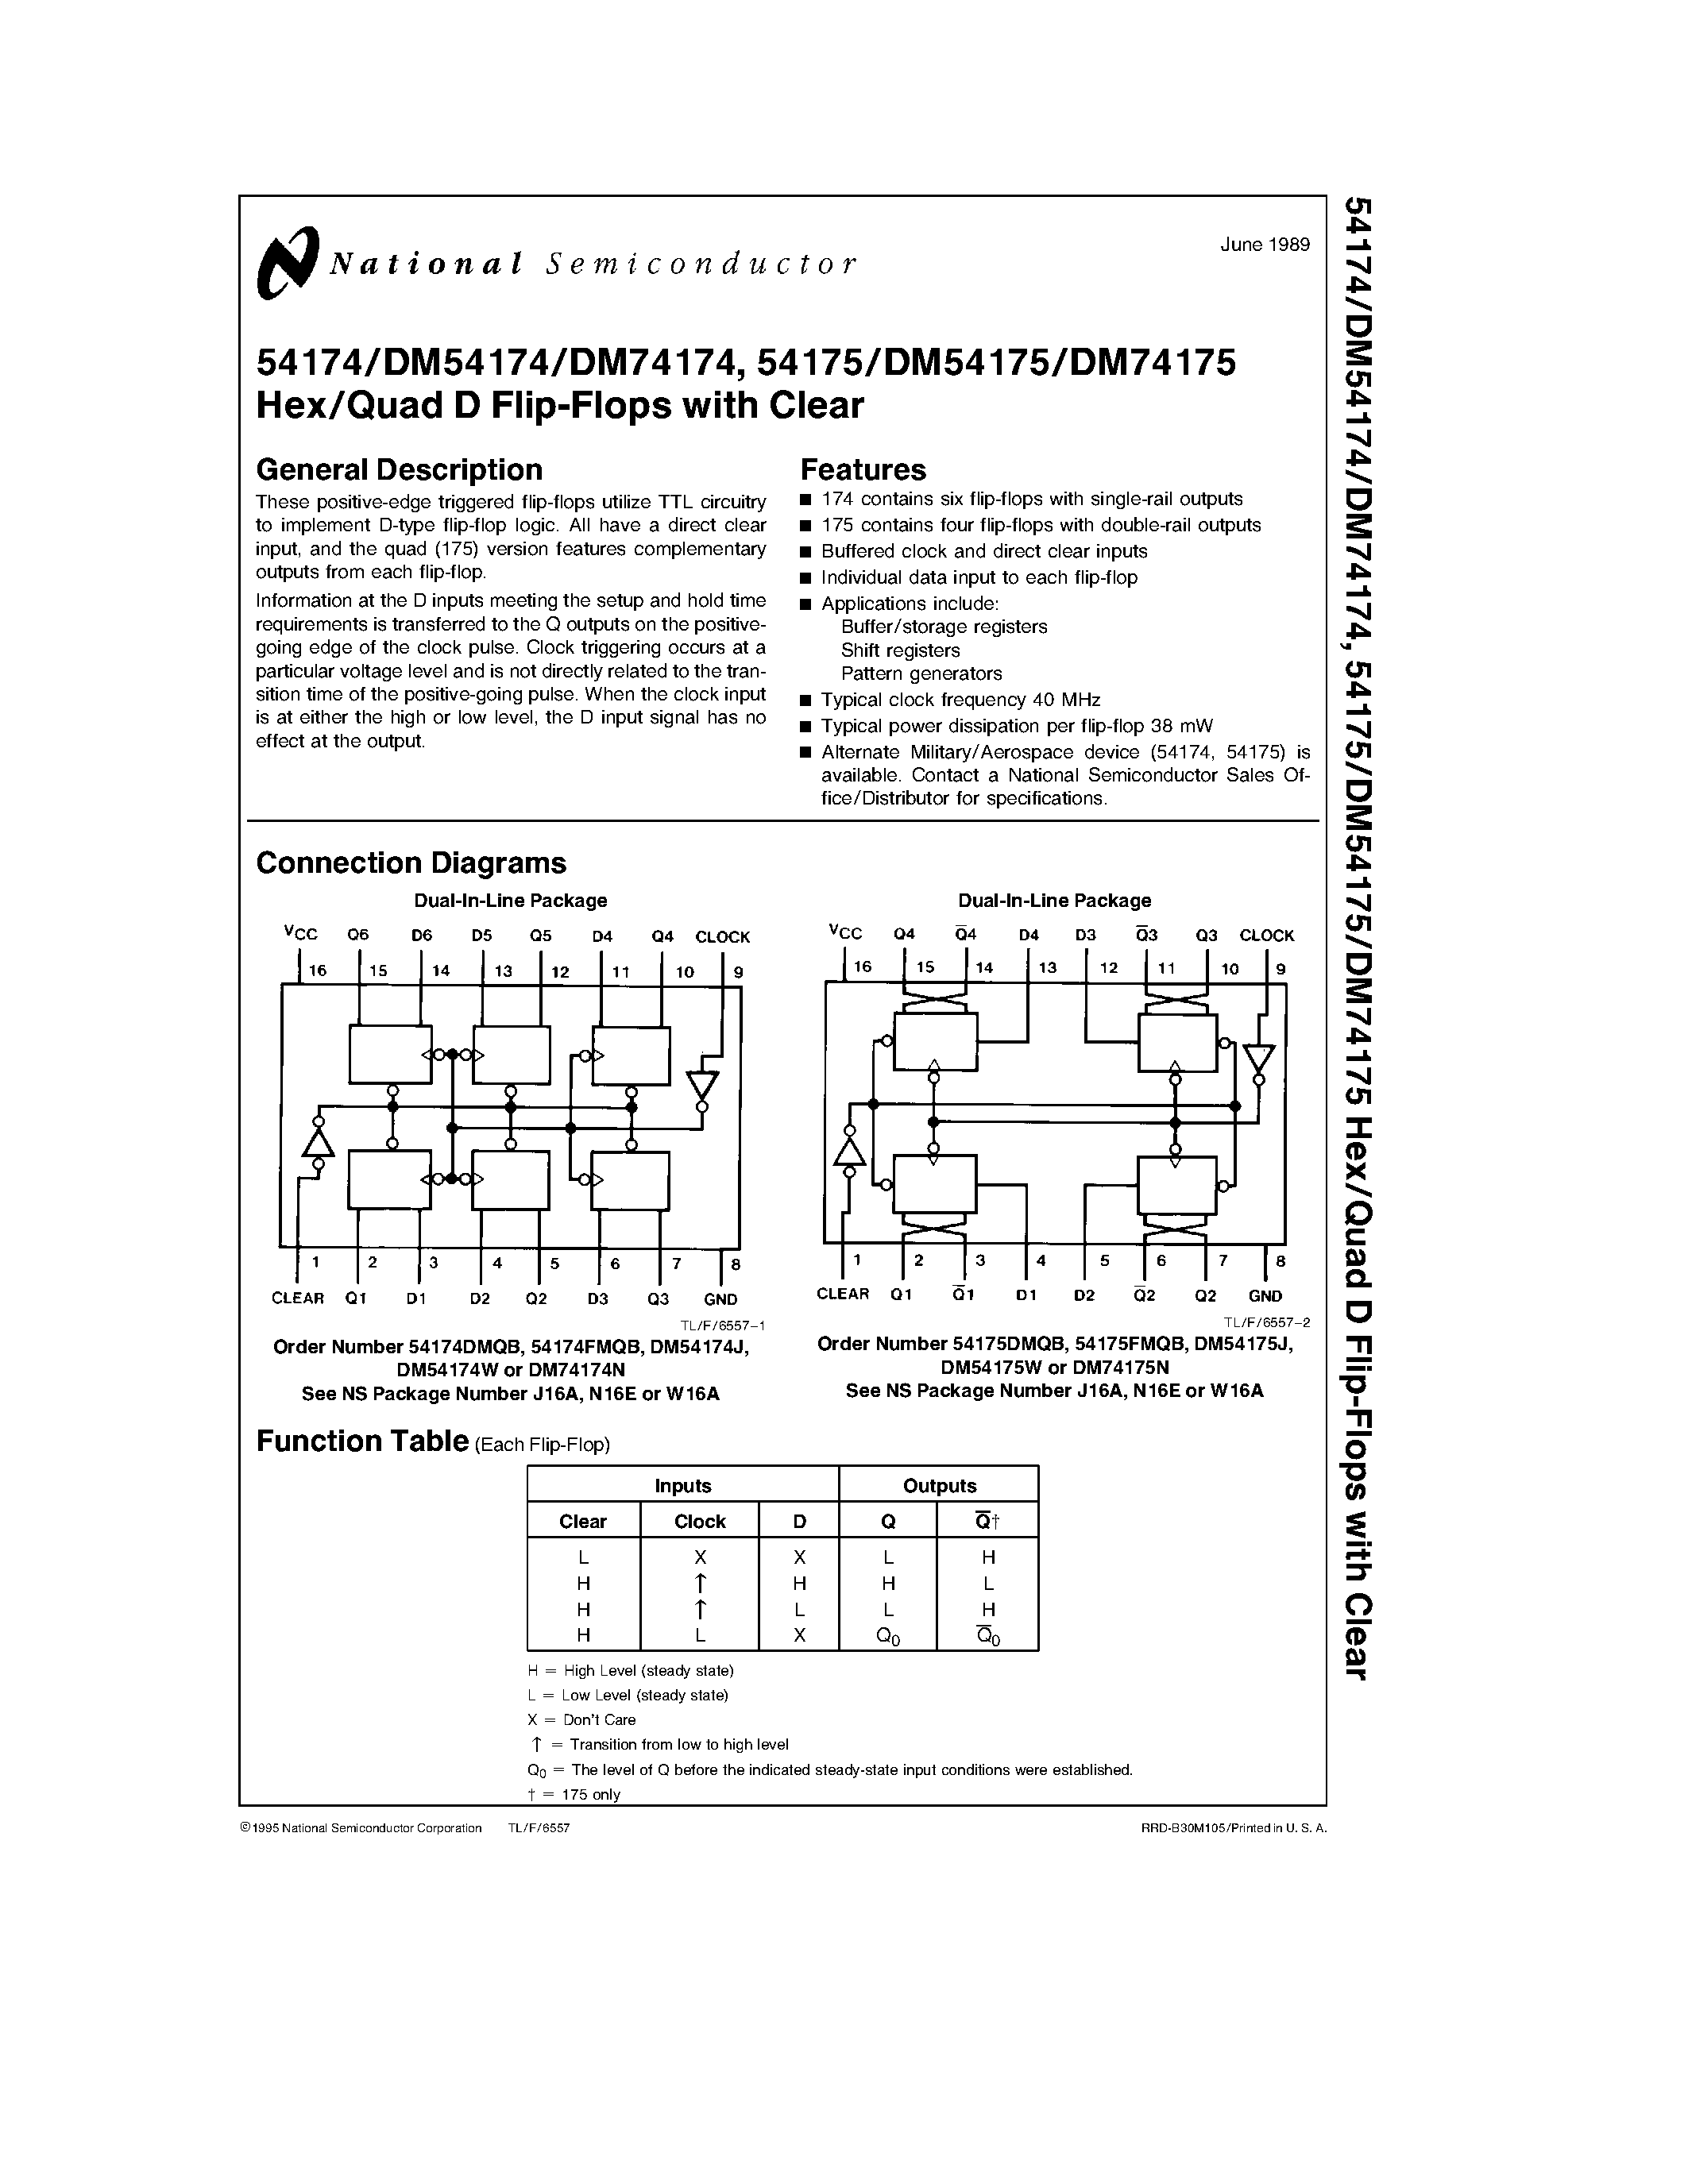 Datasheet 54174FMQB - Hex/Quad D Flip-Flops with Clear page 1